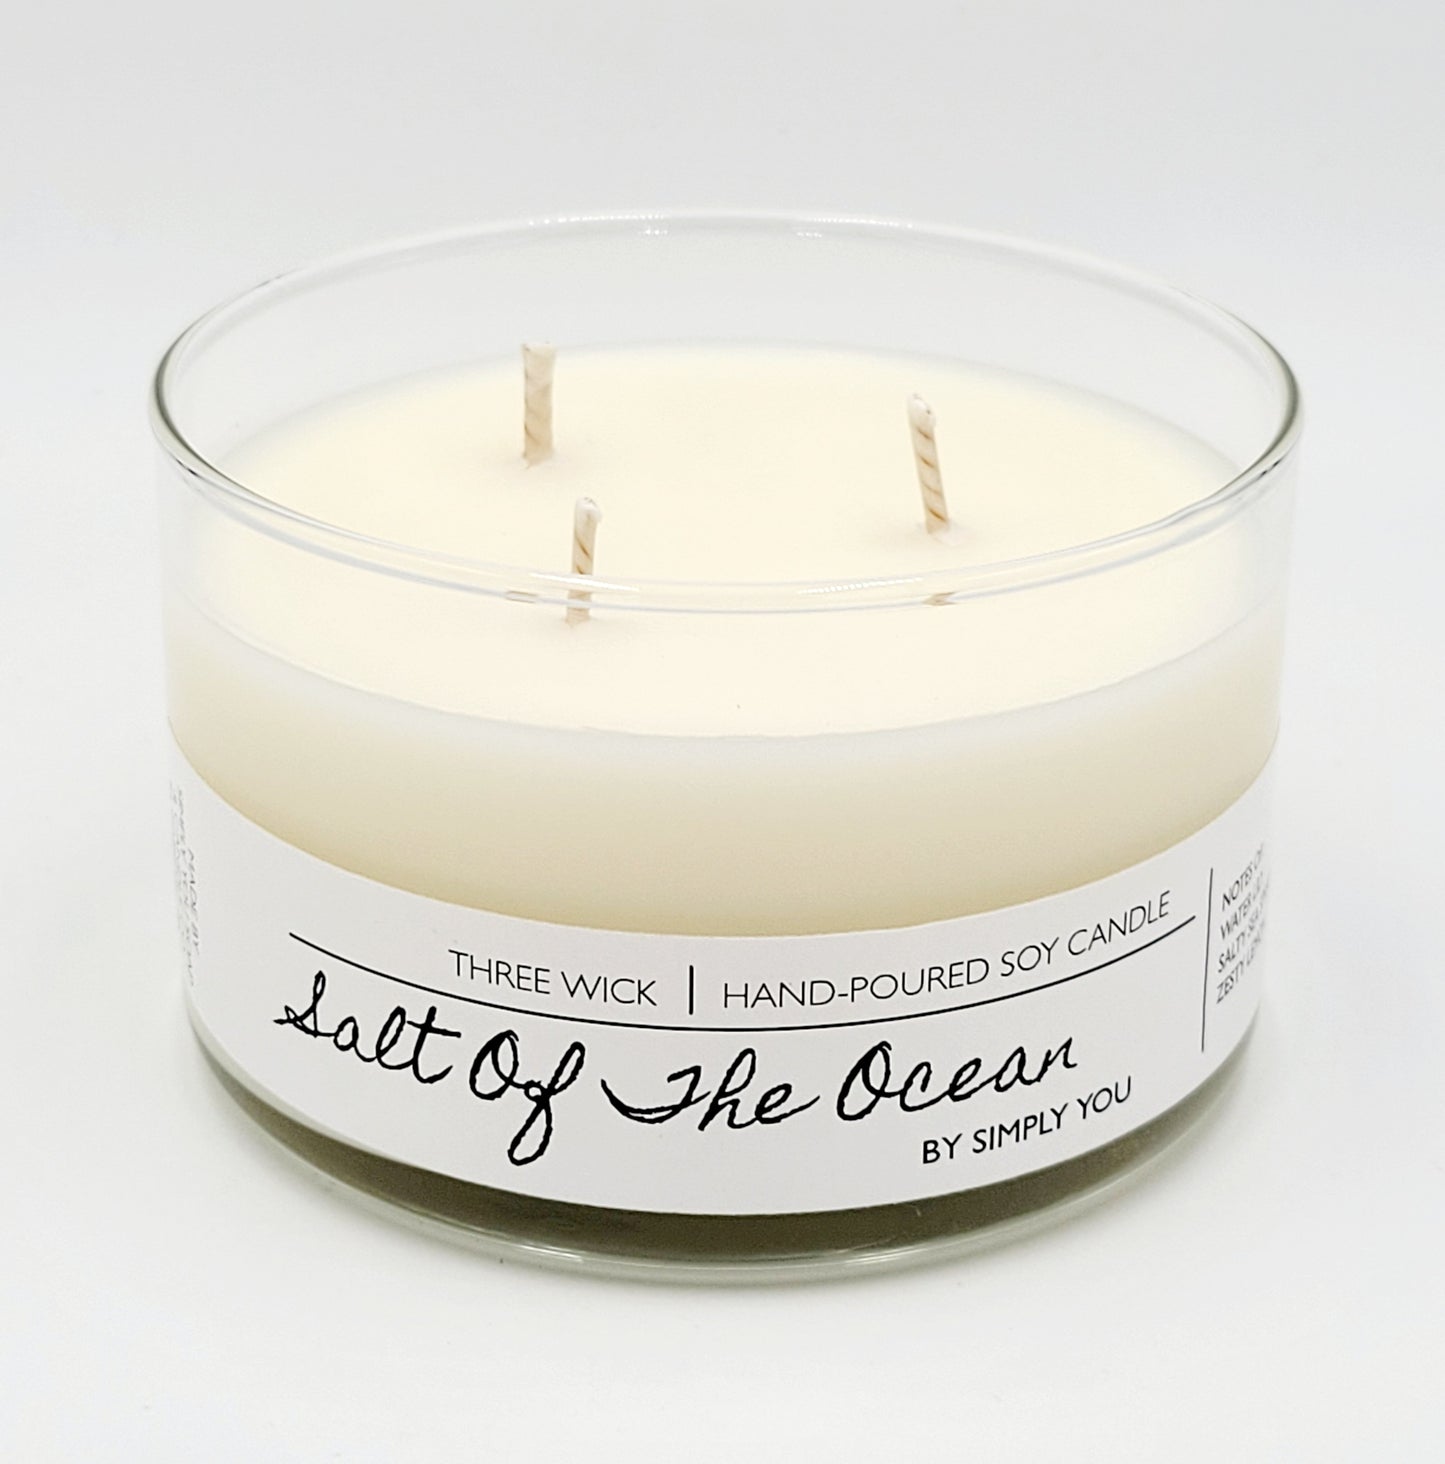 Salt of the Ocean 3 Wick Soy Candle